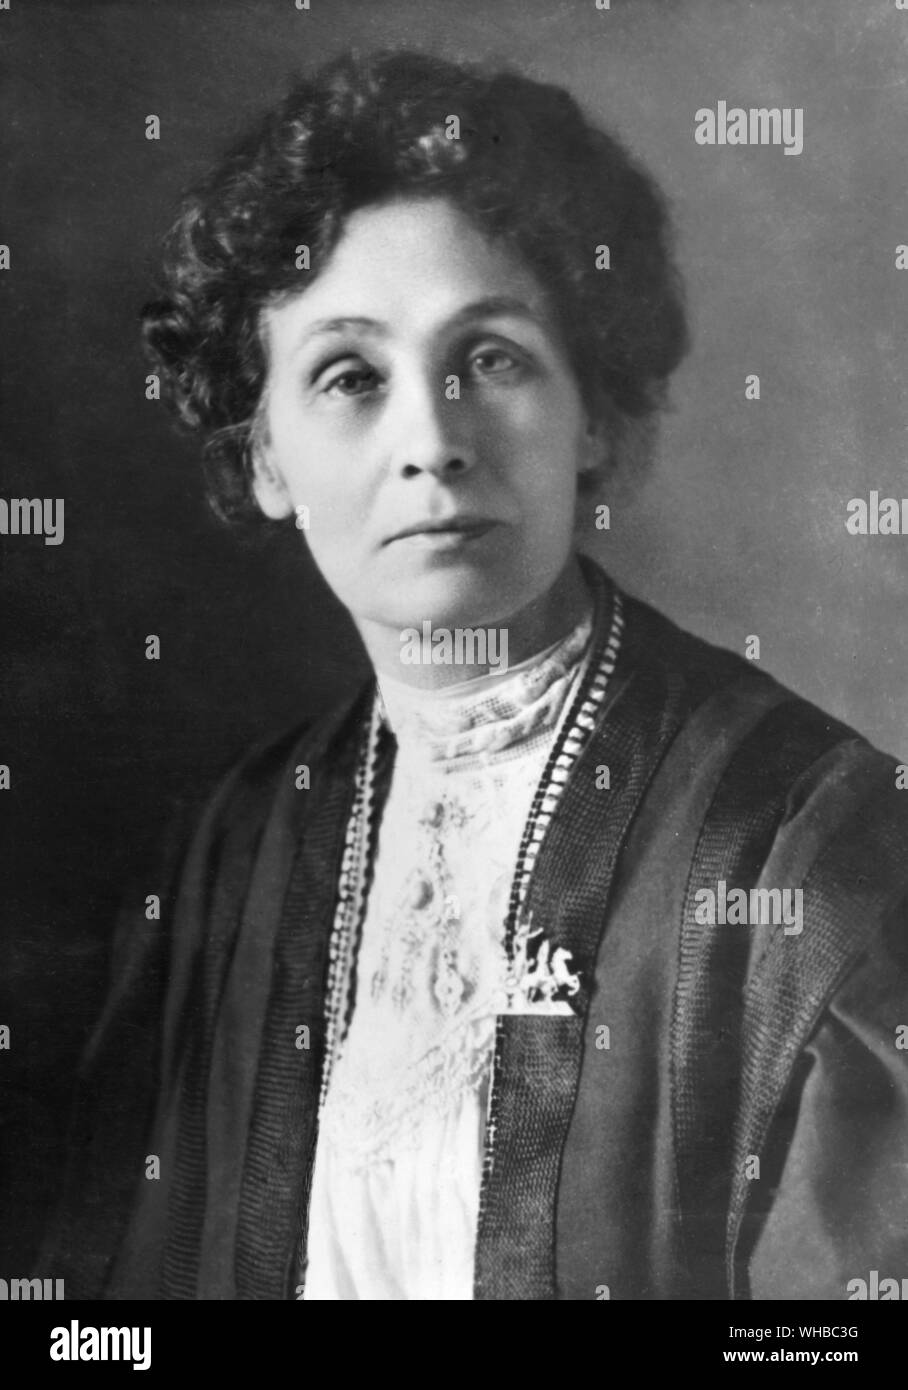 Emmeline Pankhurst (14 July 1858 - 14 June 1928) was one of the founders of the British suffragette movement. (the WSPU women's social and political union) It is the name of Mrs Pankhurst, more than any other, which is associated with the struggle for the enfranchisement of women in the United Kingdom immediately preceding World War I.. Stock Photo